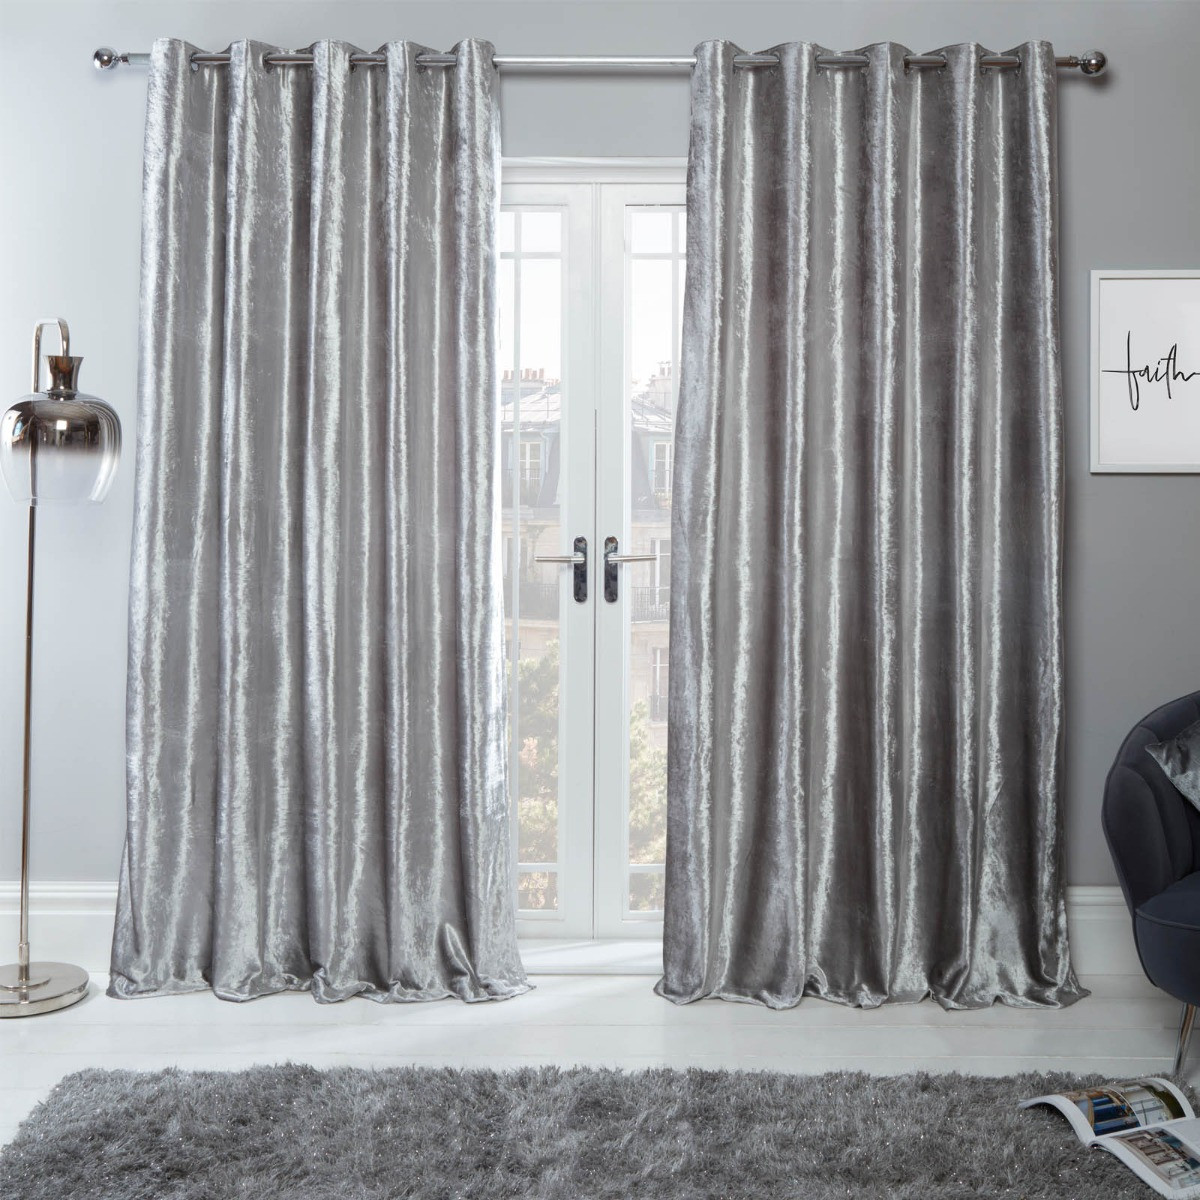 Sienna Home Crushed Velvet Eyelet Curtains - Silver 66" x 72">